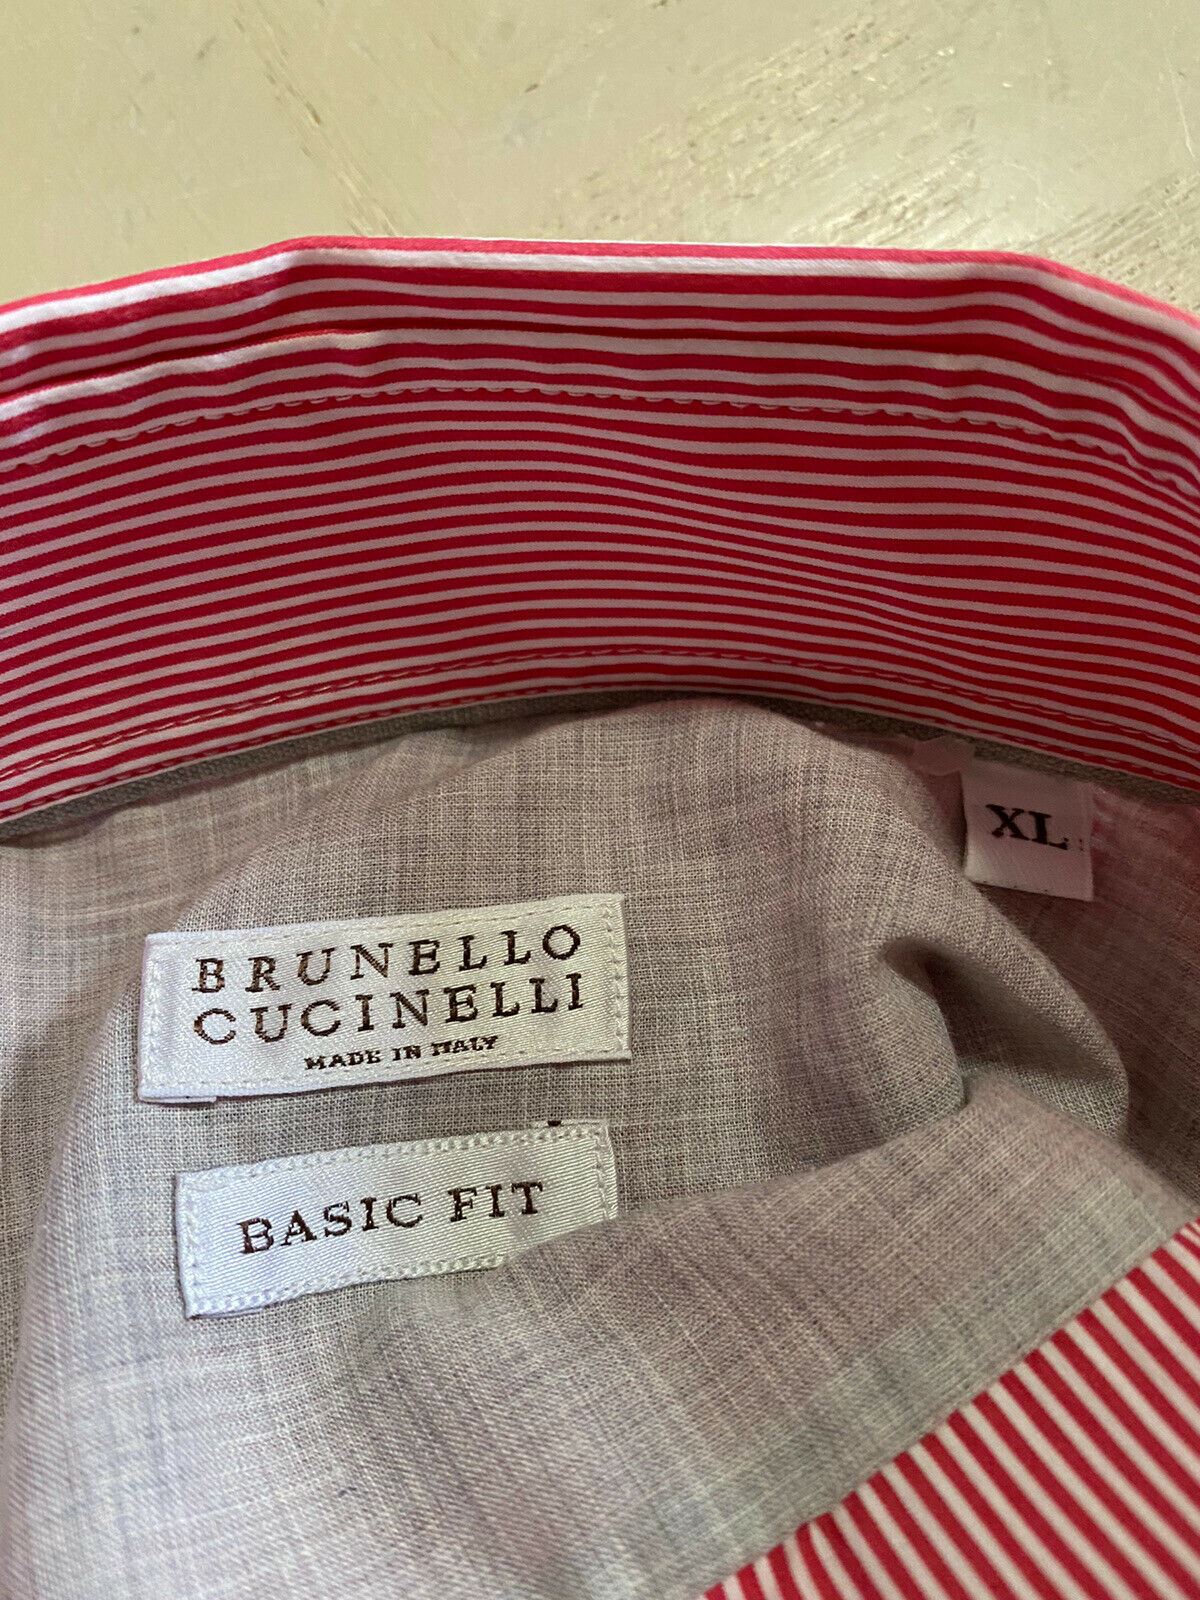 NWT Brunello Cucinelli Mens Dress Shirt Basic Fit Red XL Italy